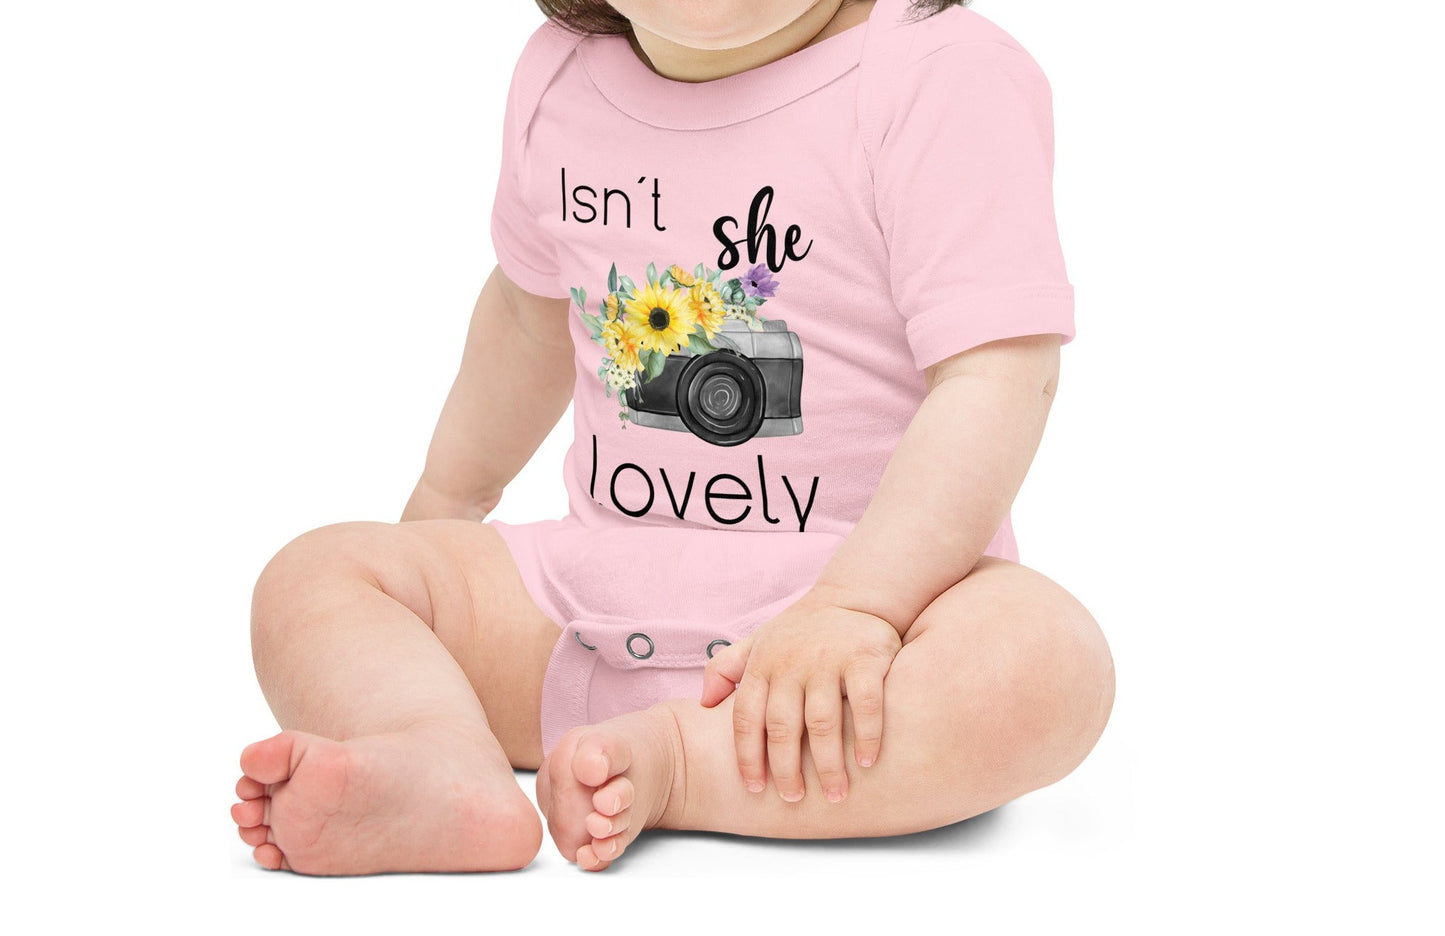  "Isn't She Lovely" Onesie | Isn't She Lovely Baby Girl Onesie®, Baby Girl Clothing, Baby Girl Gift, Baby Girl Clothes, Coming Home Outfit, Baby Shower Gift